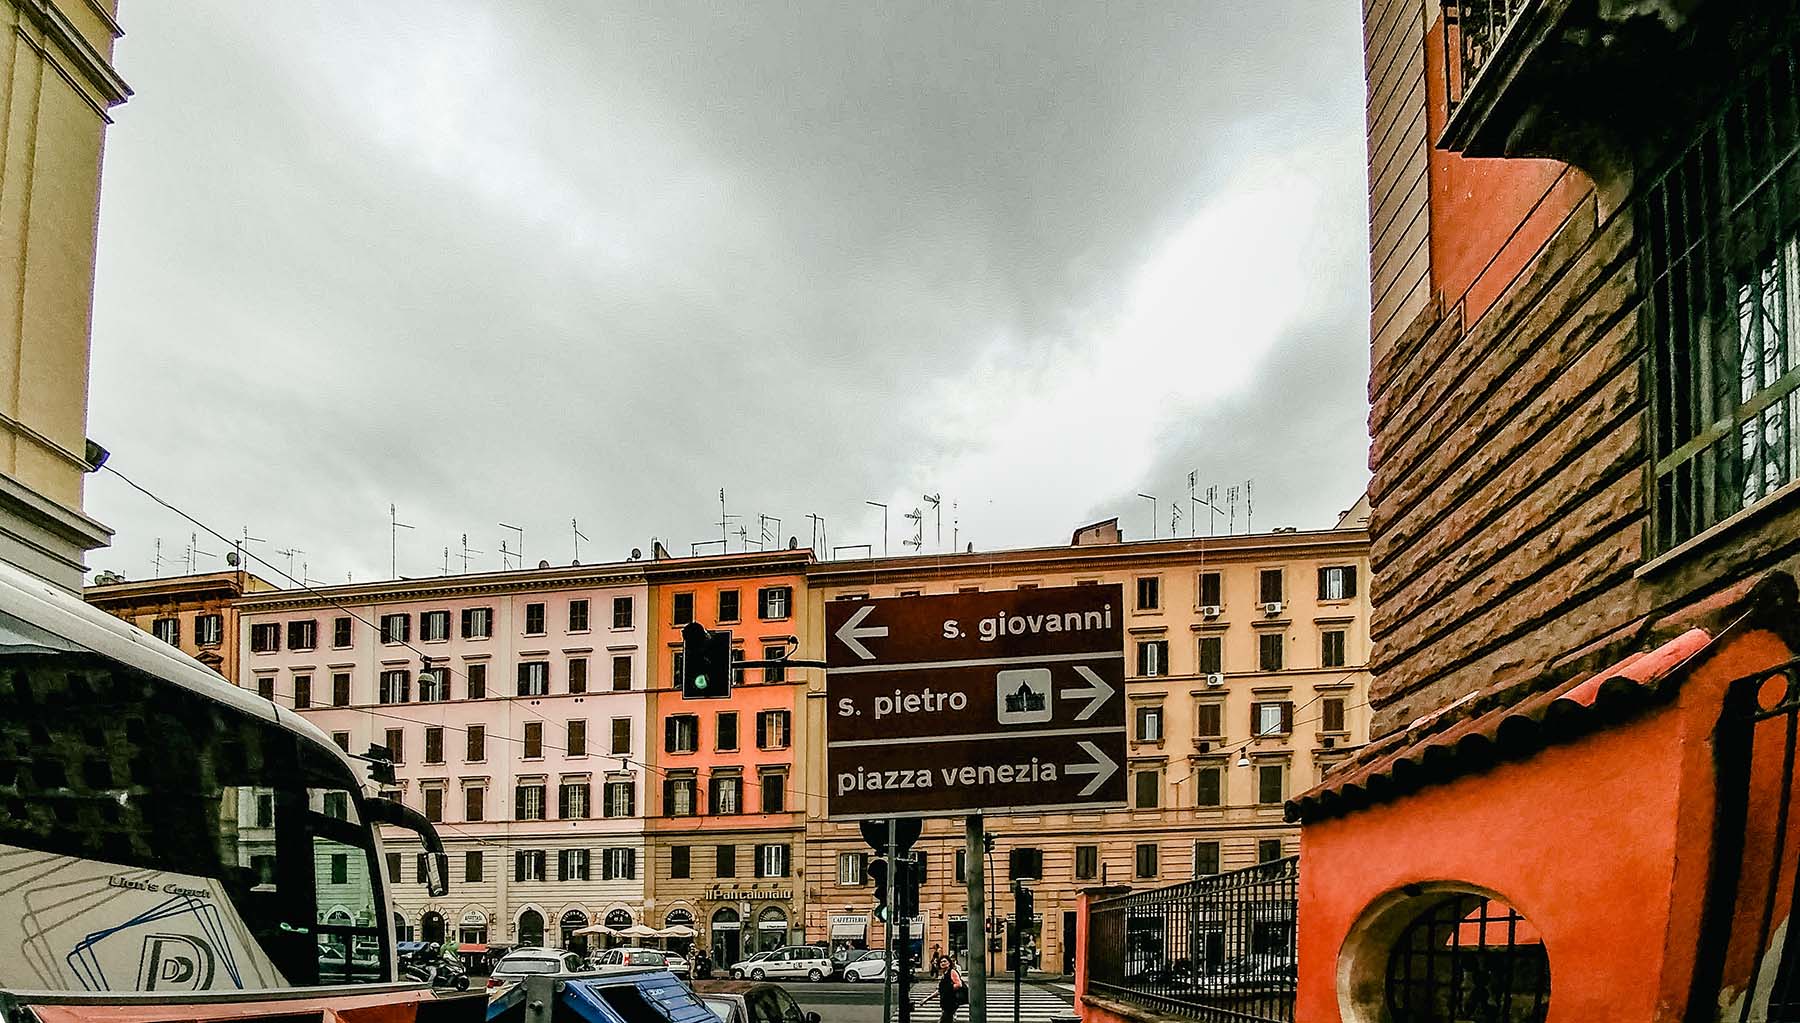 The view outside Manzoni station in Rome